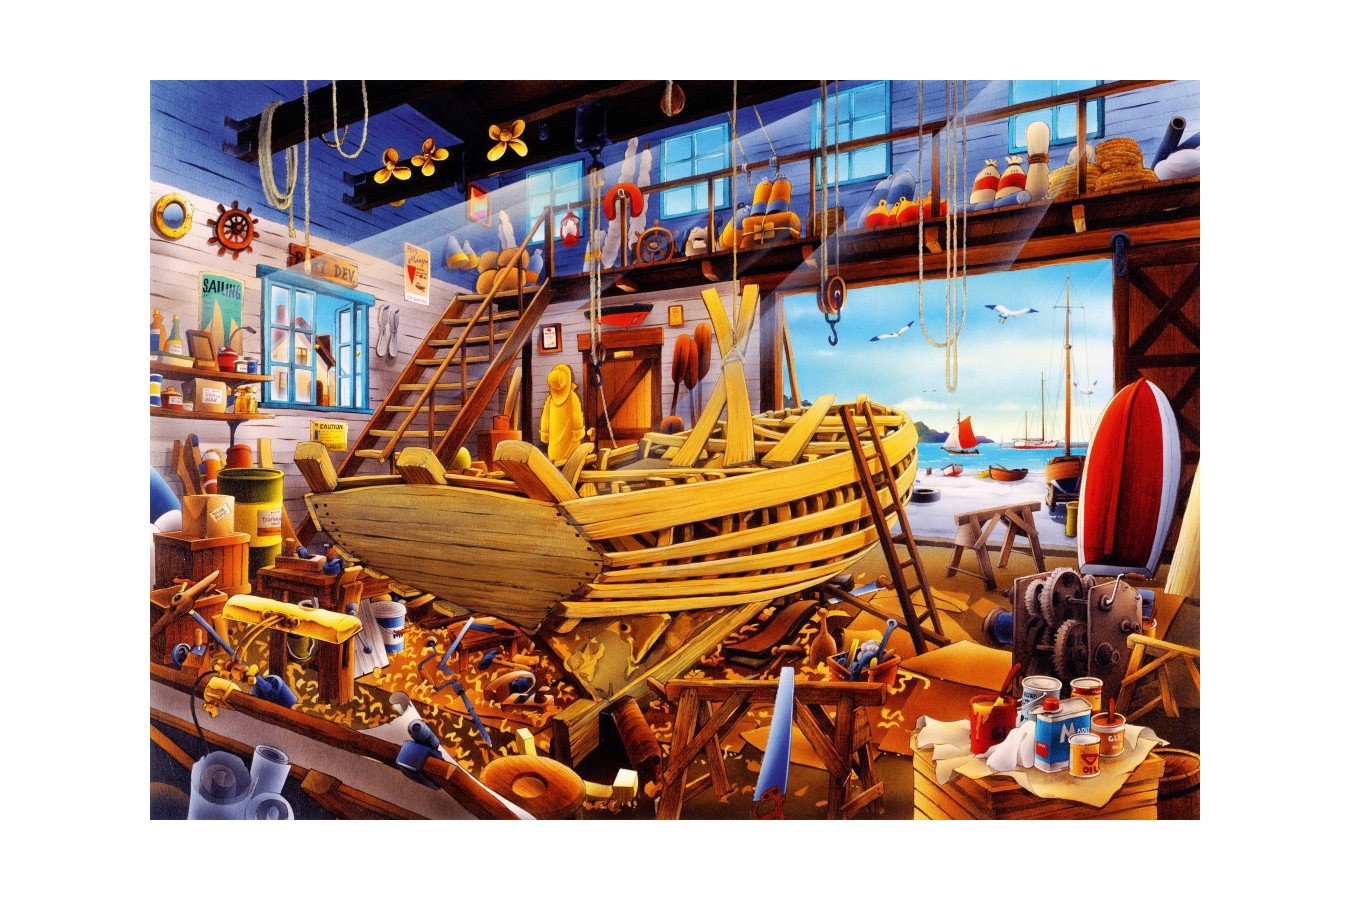 Puzzle Bluebird - Boat Yard, 1000 piese (70316-P)